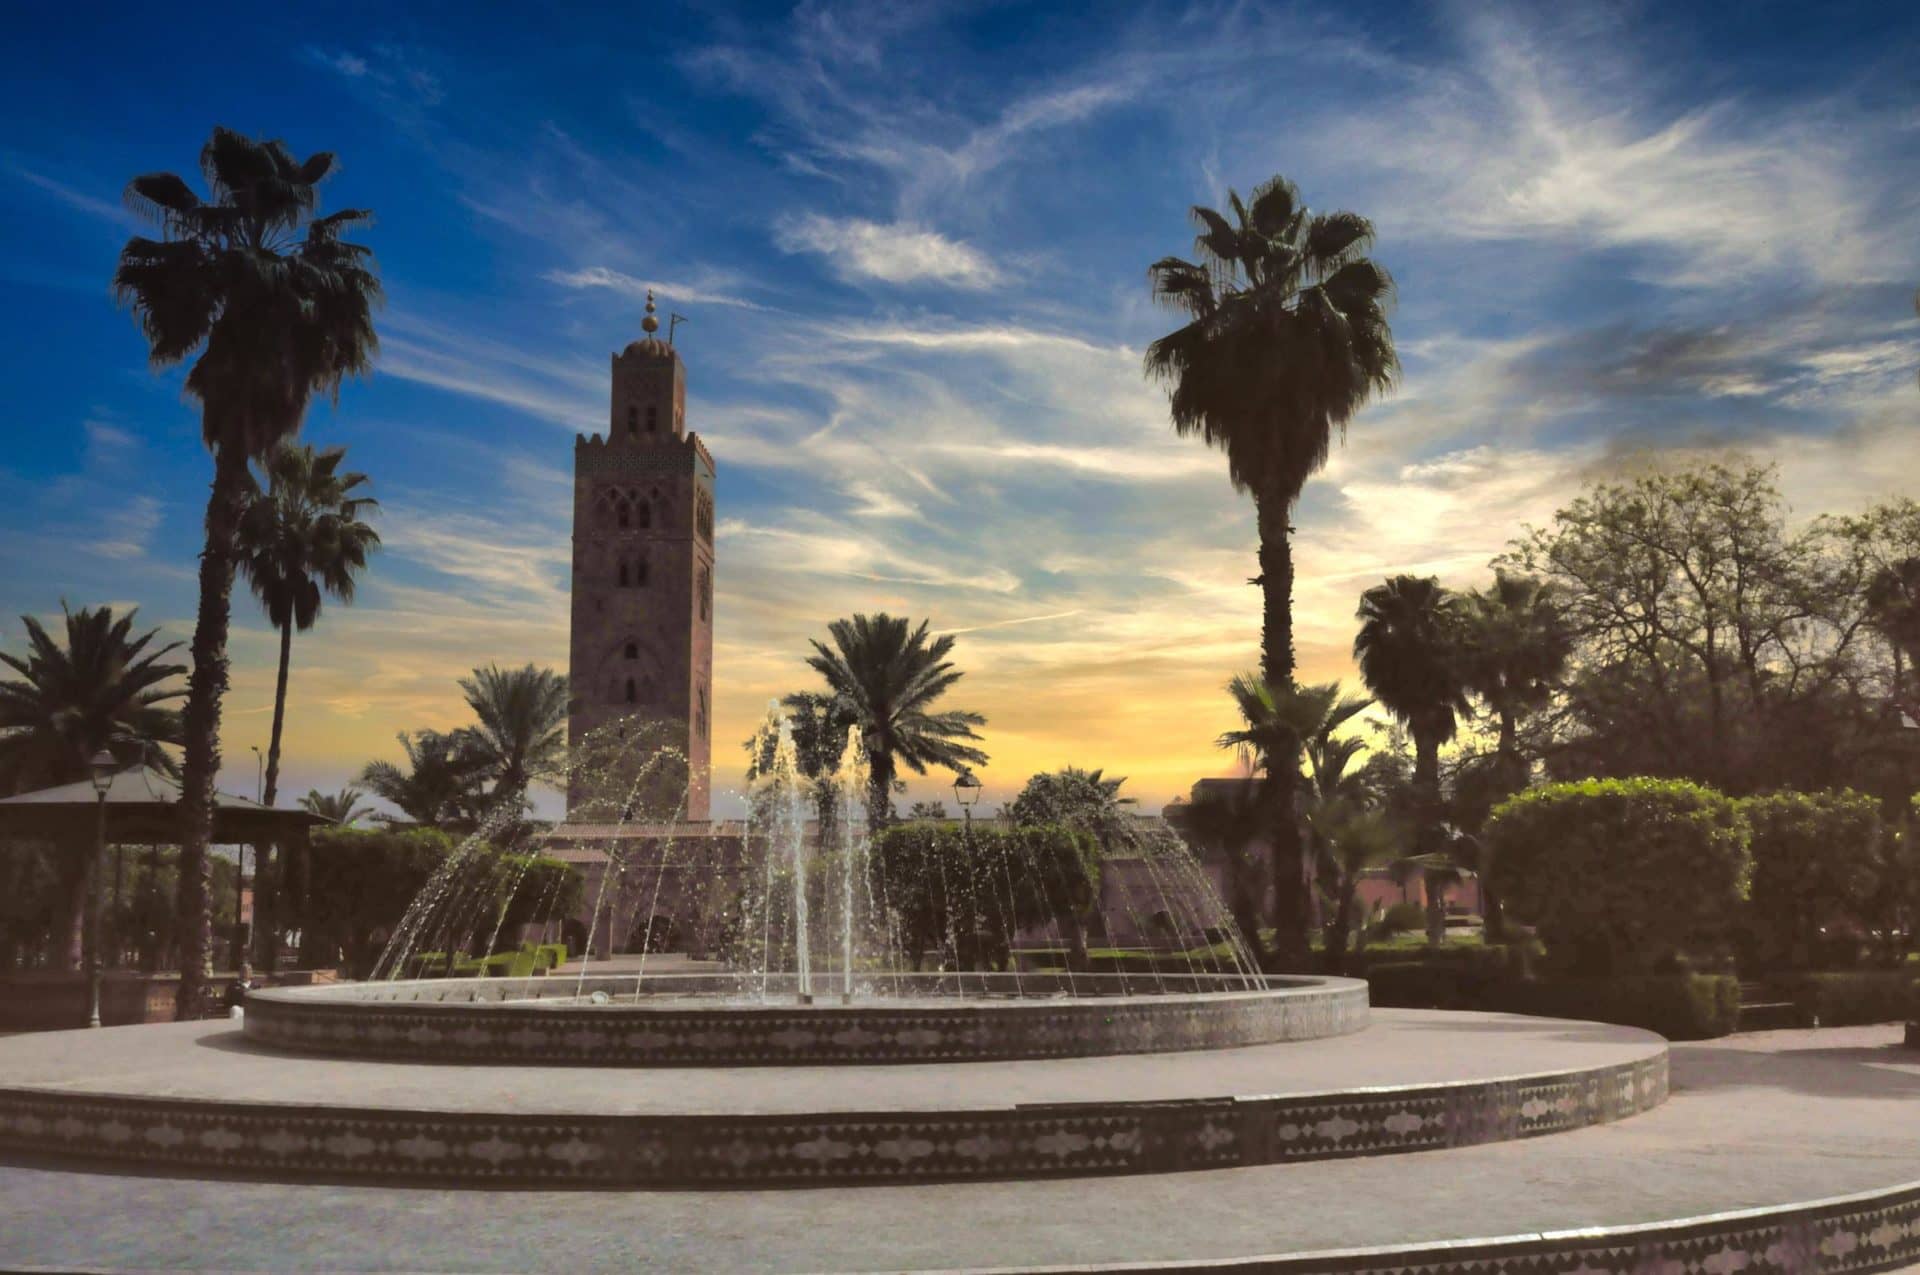 Want to take the “Marrakesh Express” to Marrakesh Morocco? What are you, high?